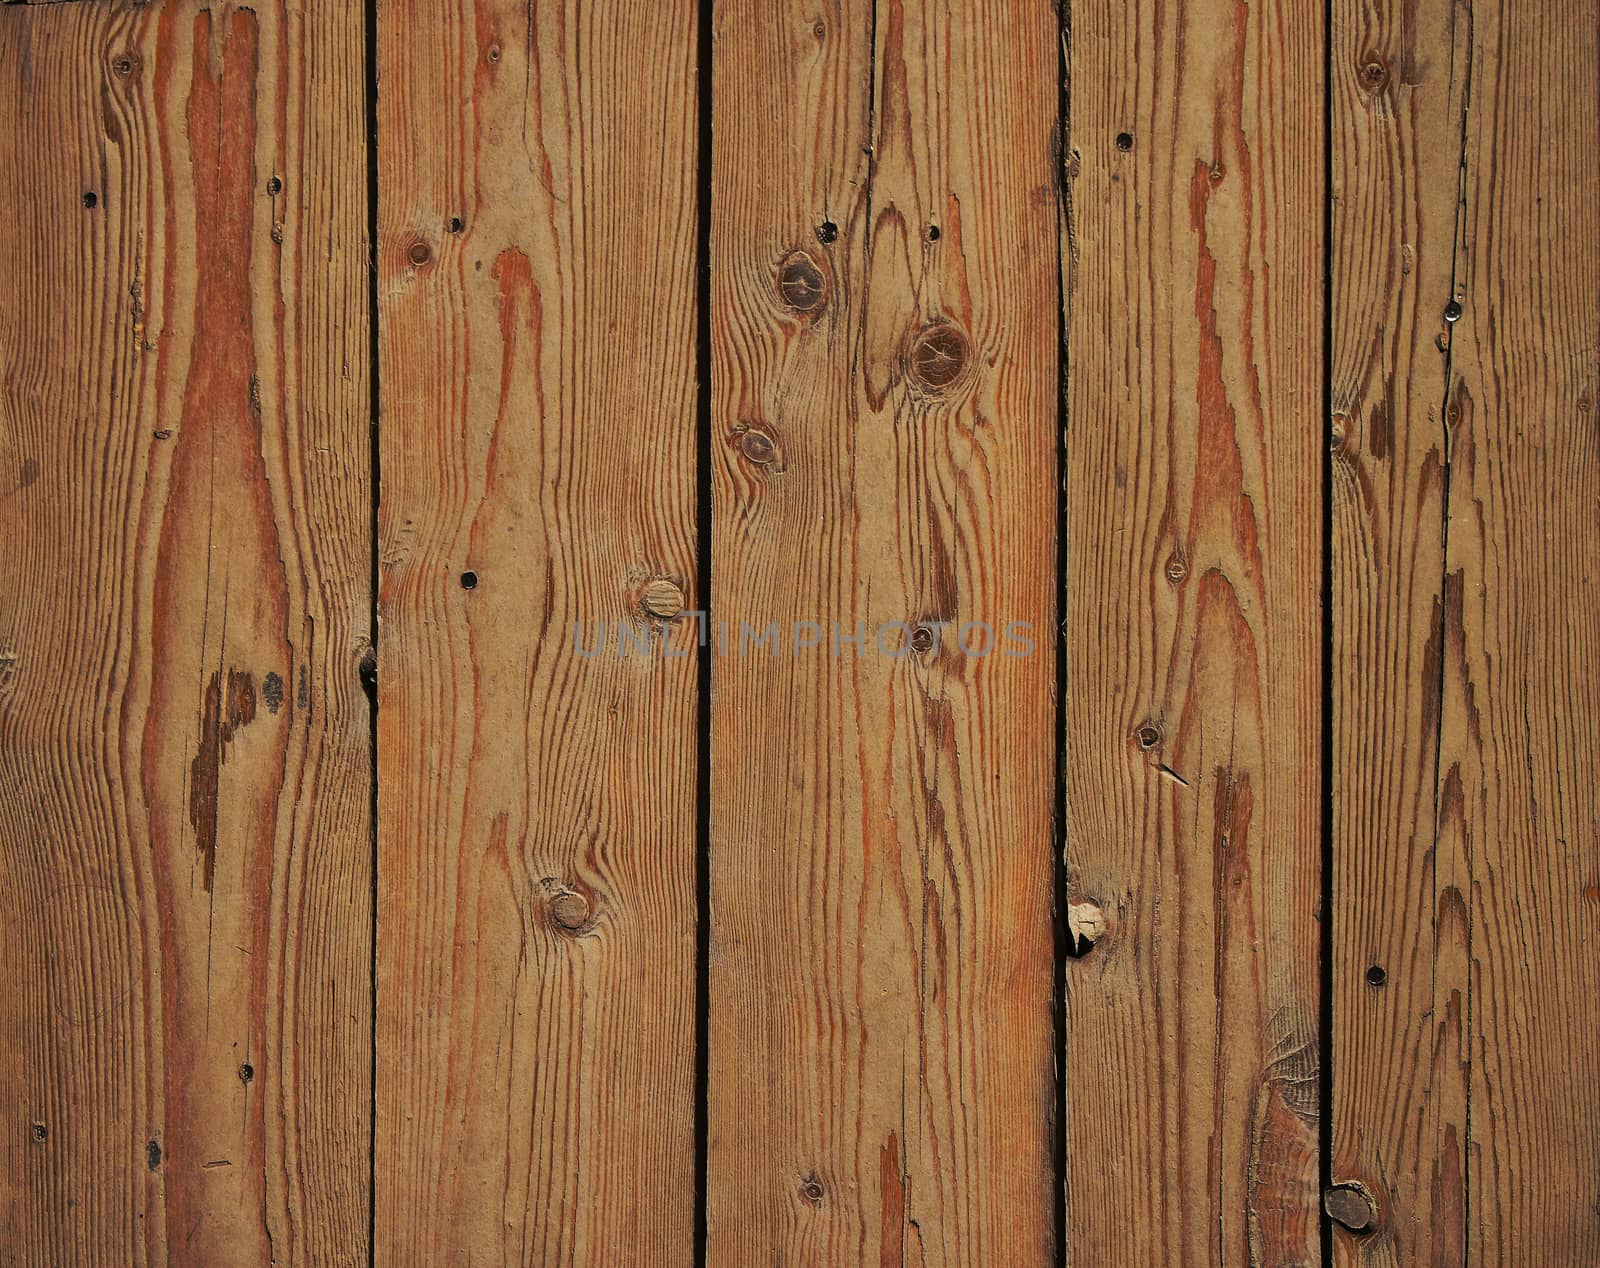 Vintage wooden panel with vertical planks and gaps by BreakingTheWalls